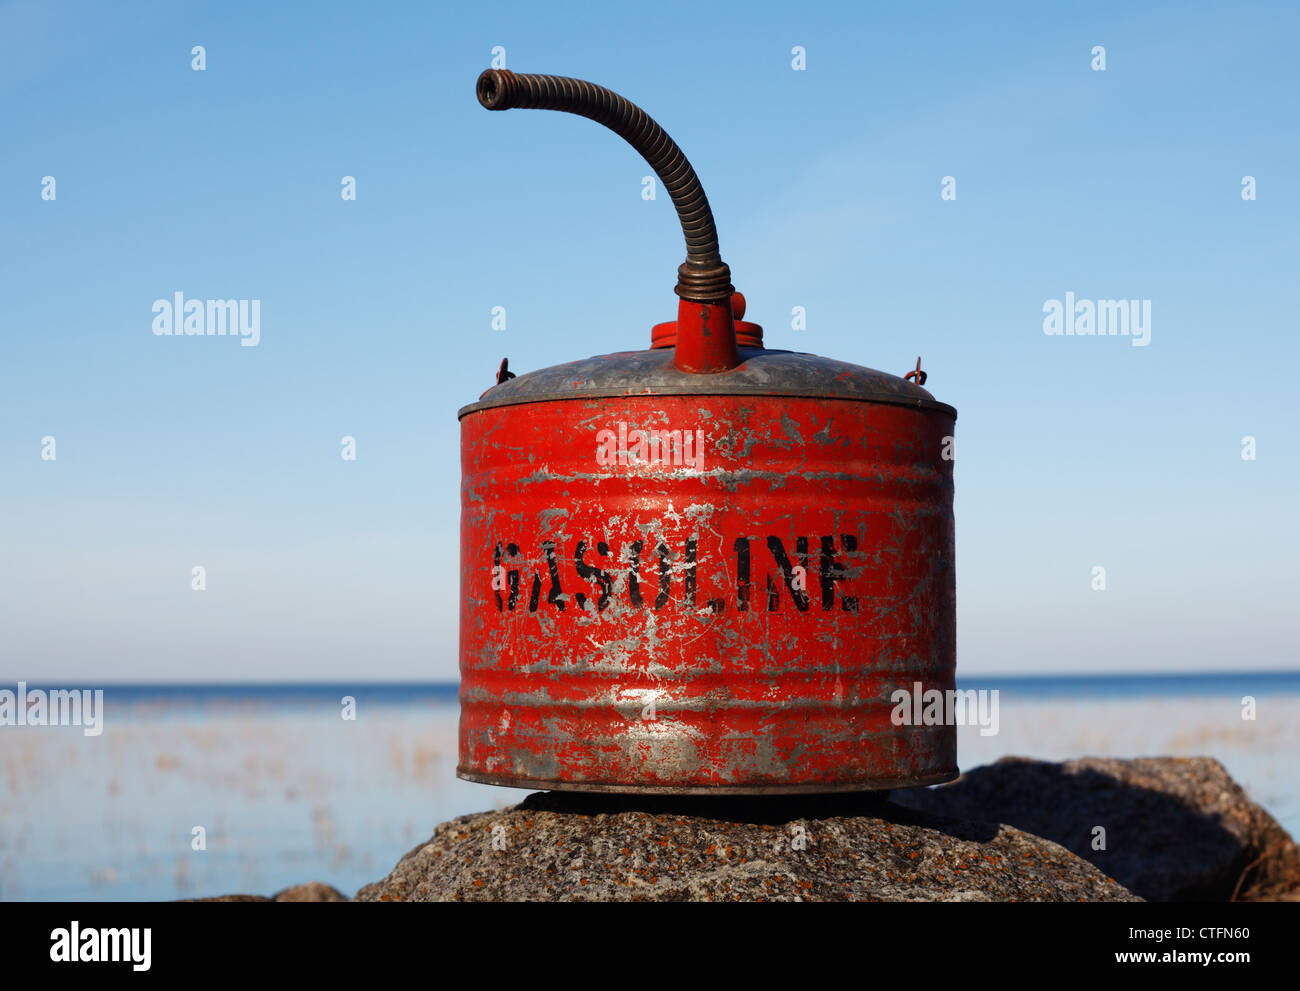 An old, red gasoline can sitting on a rock. Stock Photo